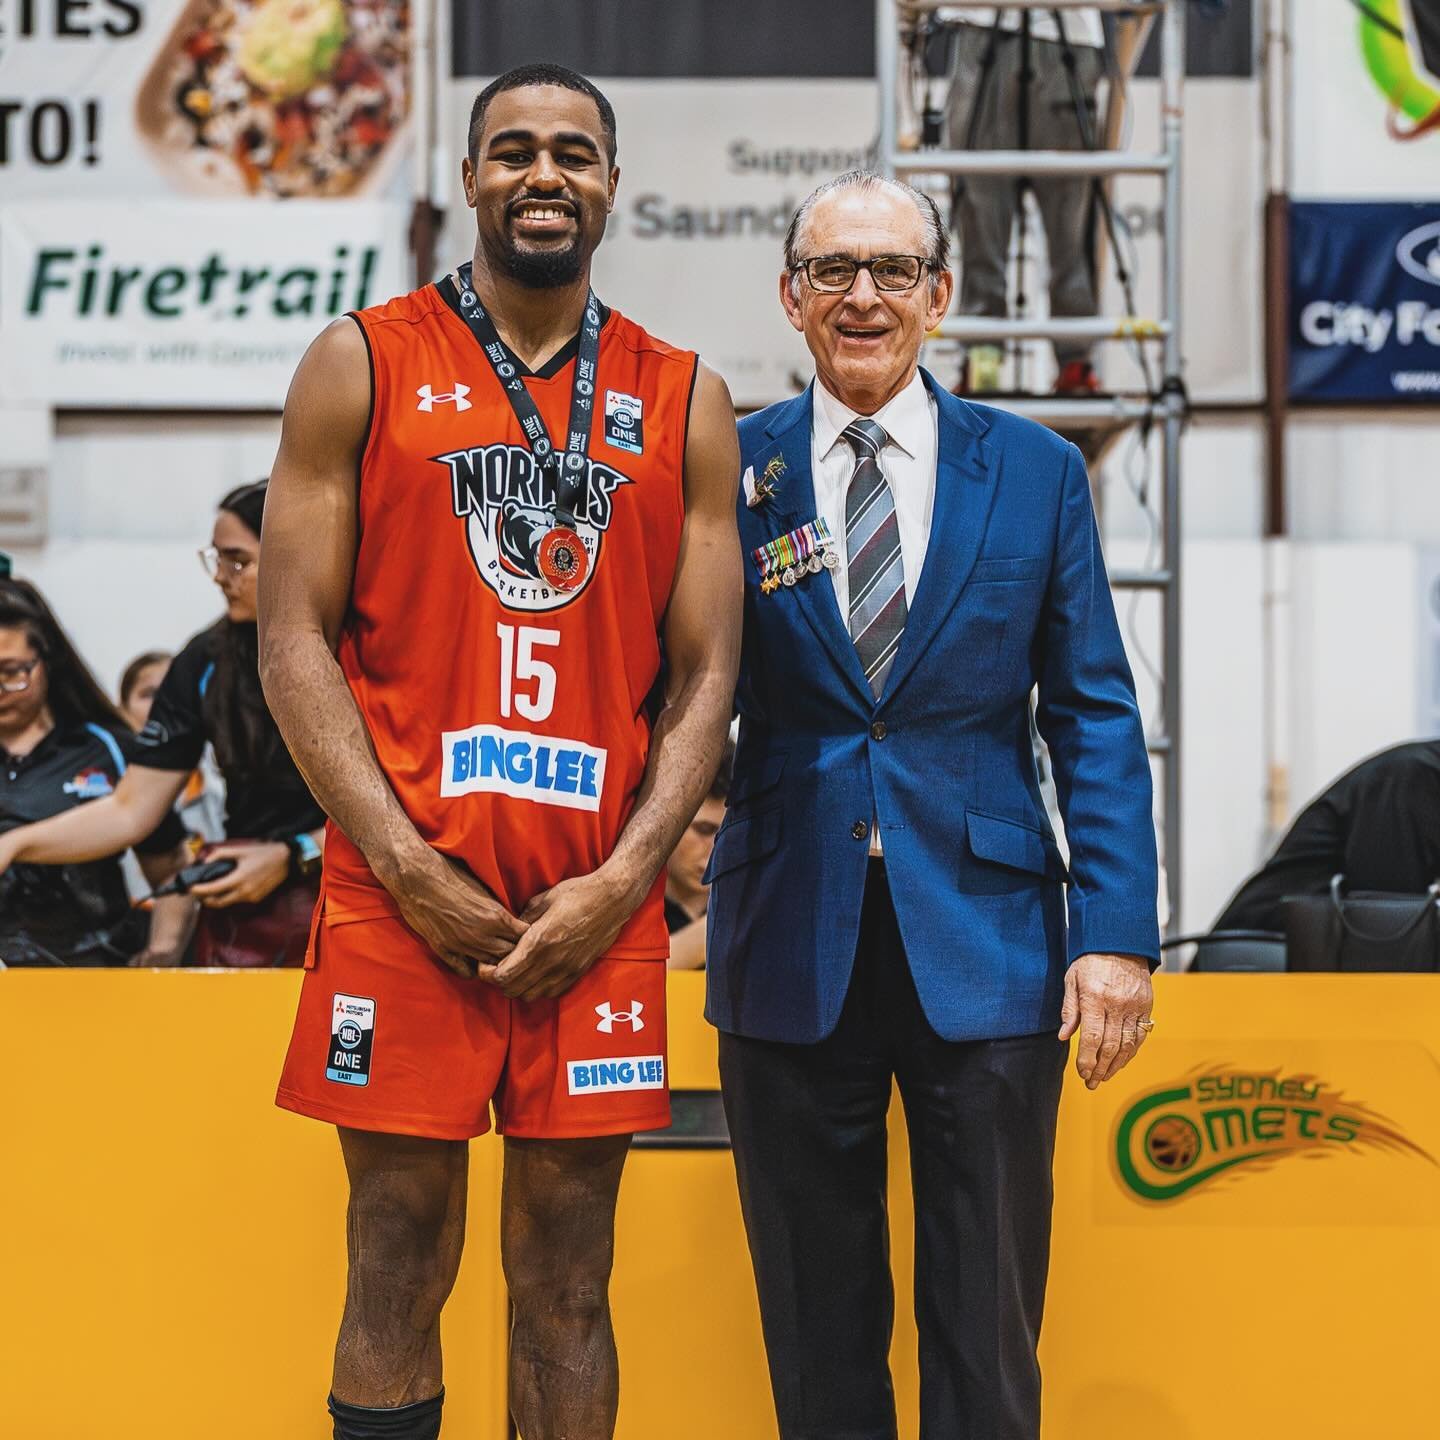 NBL1 EAST | ANZAC ROUND

The ANZAC Day fixture at Comets Stadium was nothing short of electrifying, as our Bing Lee Norths Bears NBL1 teams clashed with the Sydney Comets in a thrilling showdown. With the spirit of remembrance and competition in the 